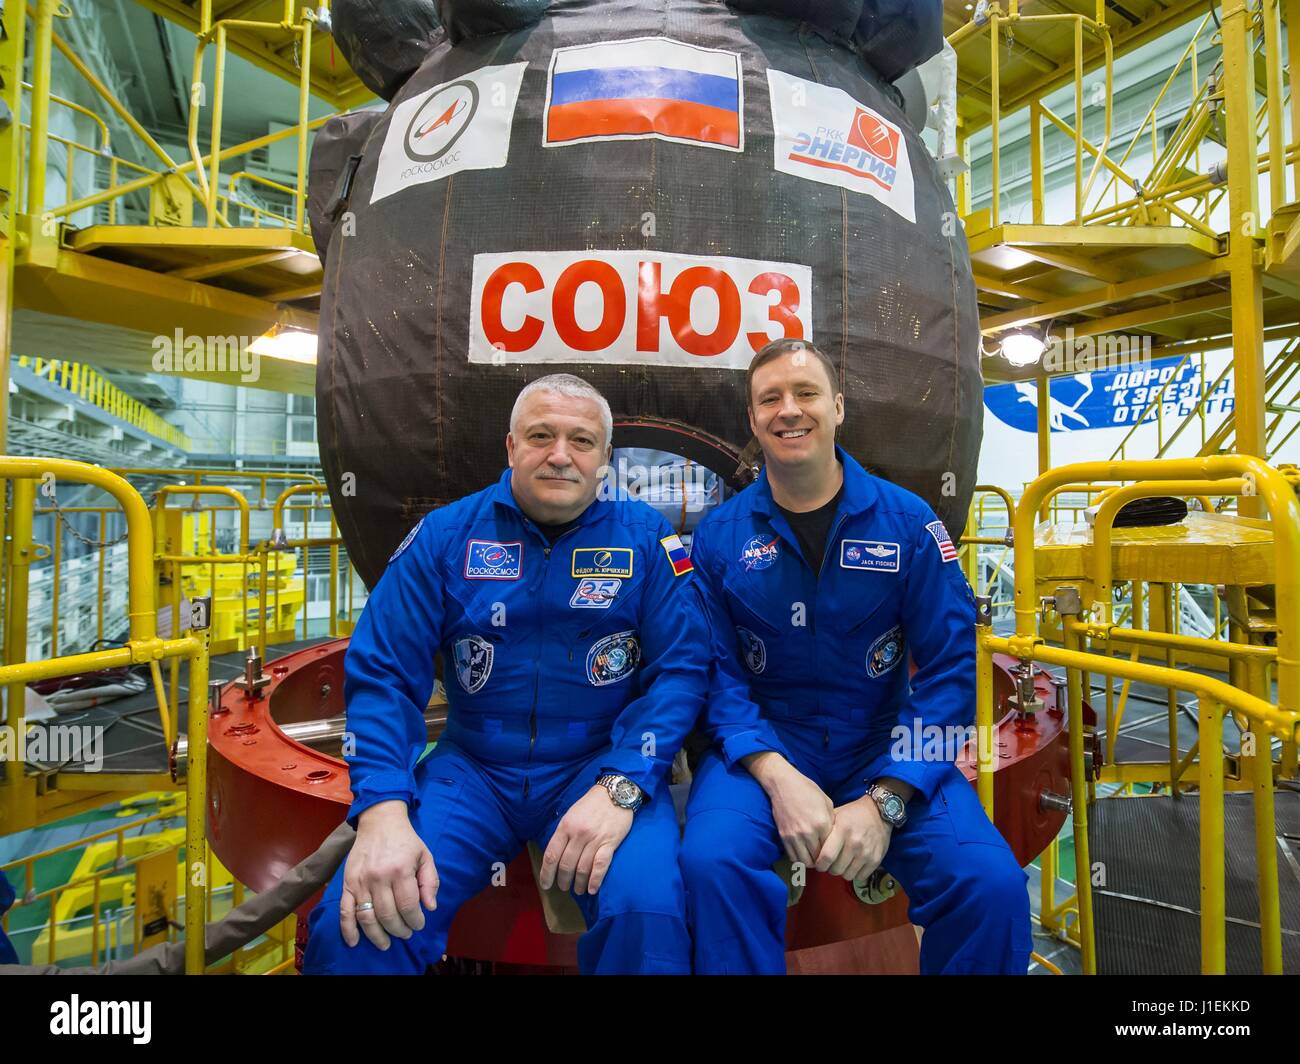 NASA International Space Station Expedition 51 prime crew members Russian cosmonaut Fyodor Yurchikhin of Roscosmos (left) and American astronaut Jack Fischer pose in front of their Soyuz MS-04 spacecraft during pre-launch preparations at the Baikonur Cosmodrome April 6, 2017 in Baikonur, Kazakhstan.      (photo by Andrey Shelepin /NASA   via Planetpix) Stock Photo